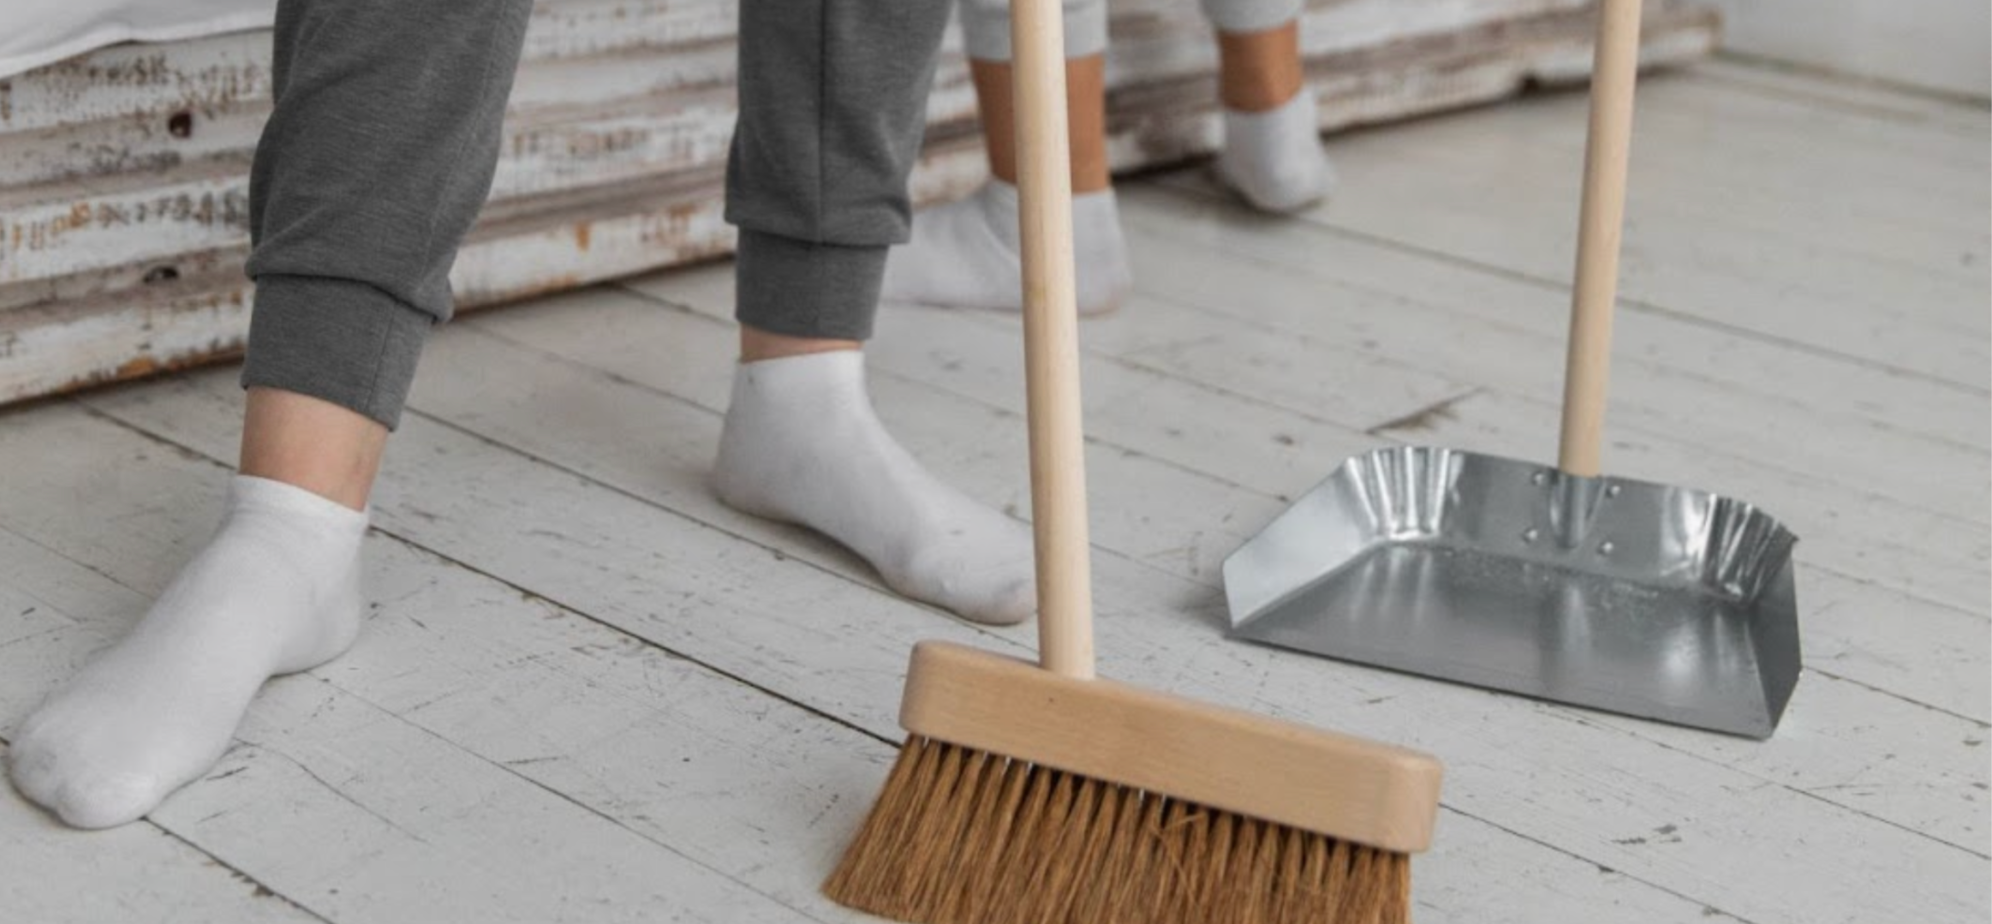 Person cleaning their home and sweeping the floors with a dustpan and brush